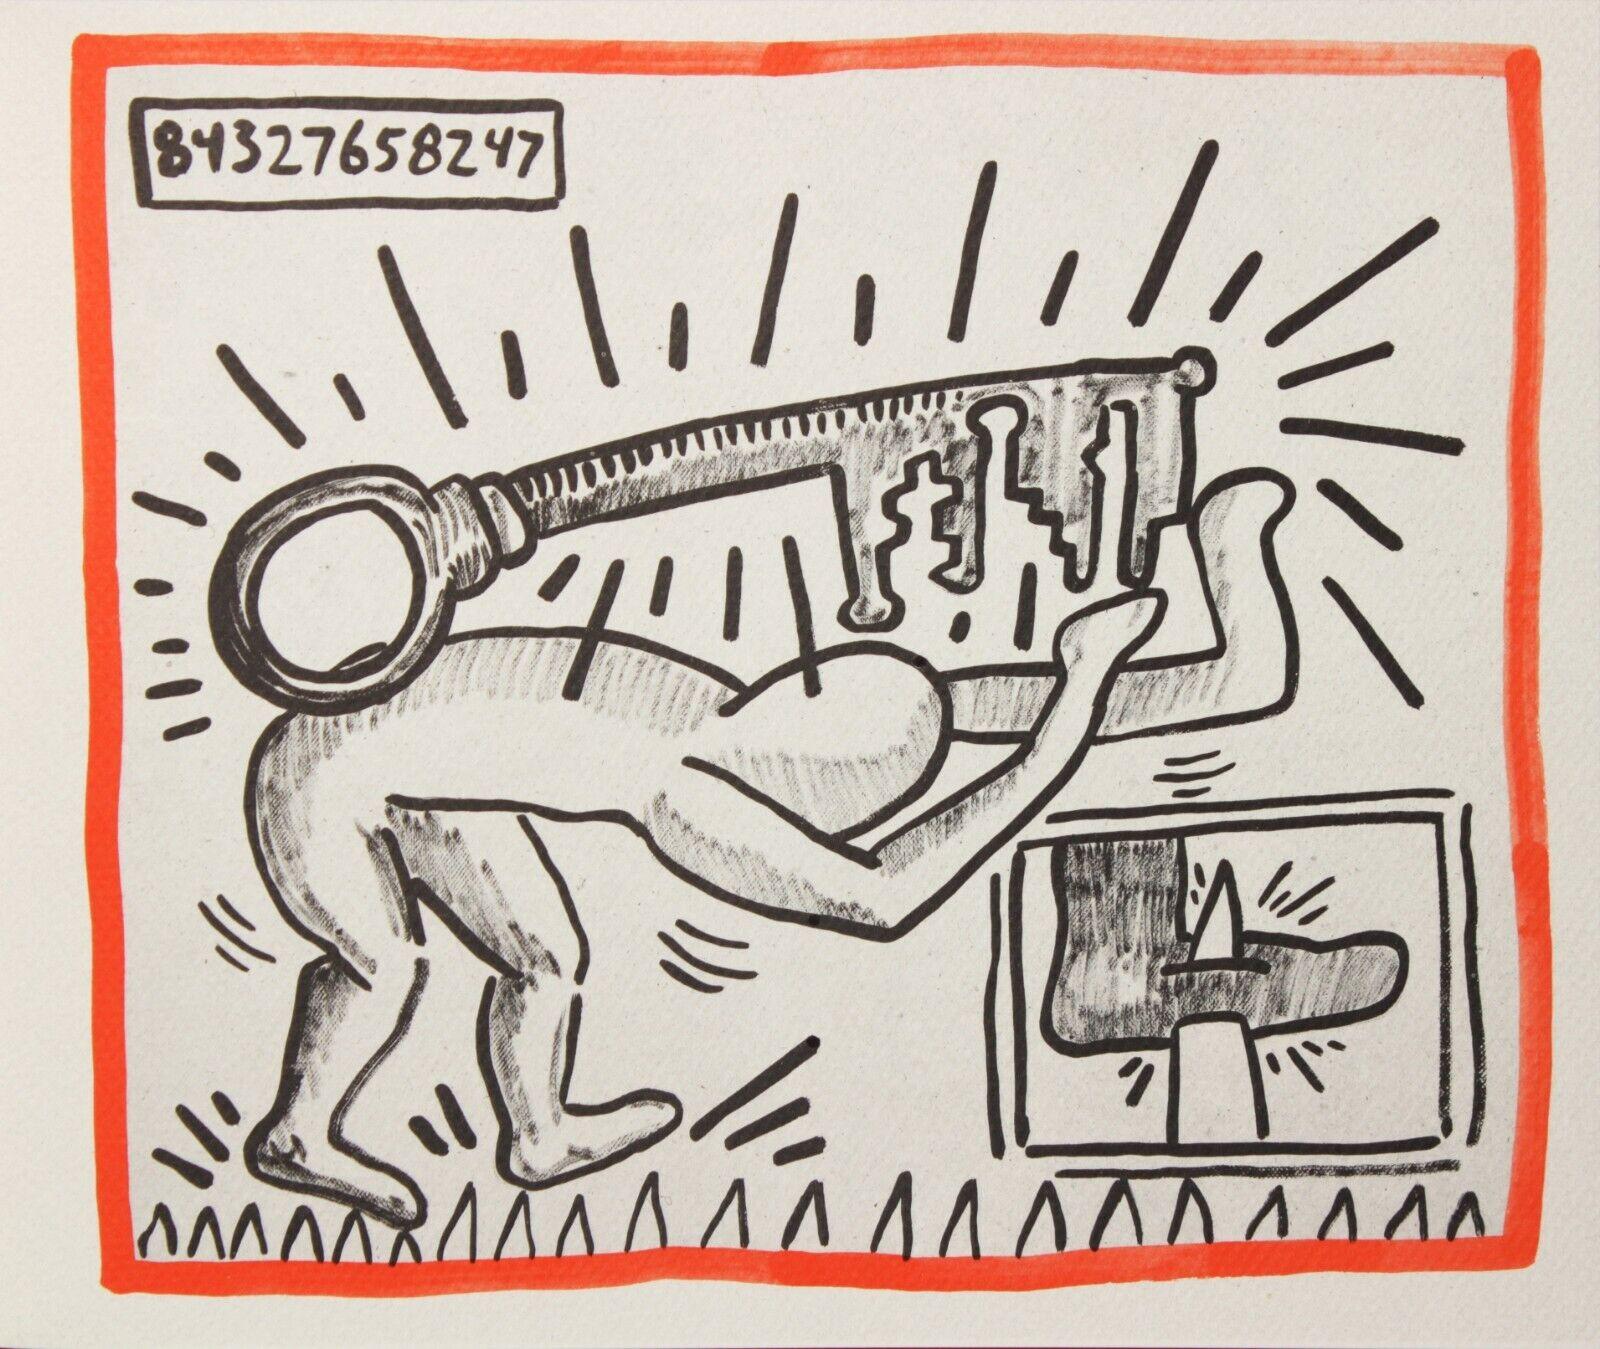 Artist: Keith Haring
Title: Untitled
Year: 1990
Dimensions: 8.75in. by 10.25in.
Framed: 18.75in. x 20.25in.
Edition: From the rare limited edition of 500
Publisher: Bebert Publishing House
Suite: Against all Odds 20 Drawings
Medium: Original